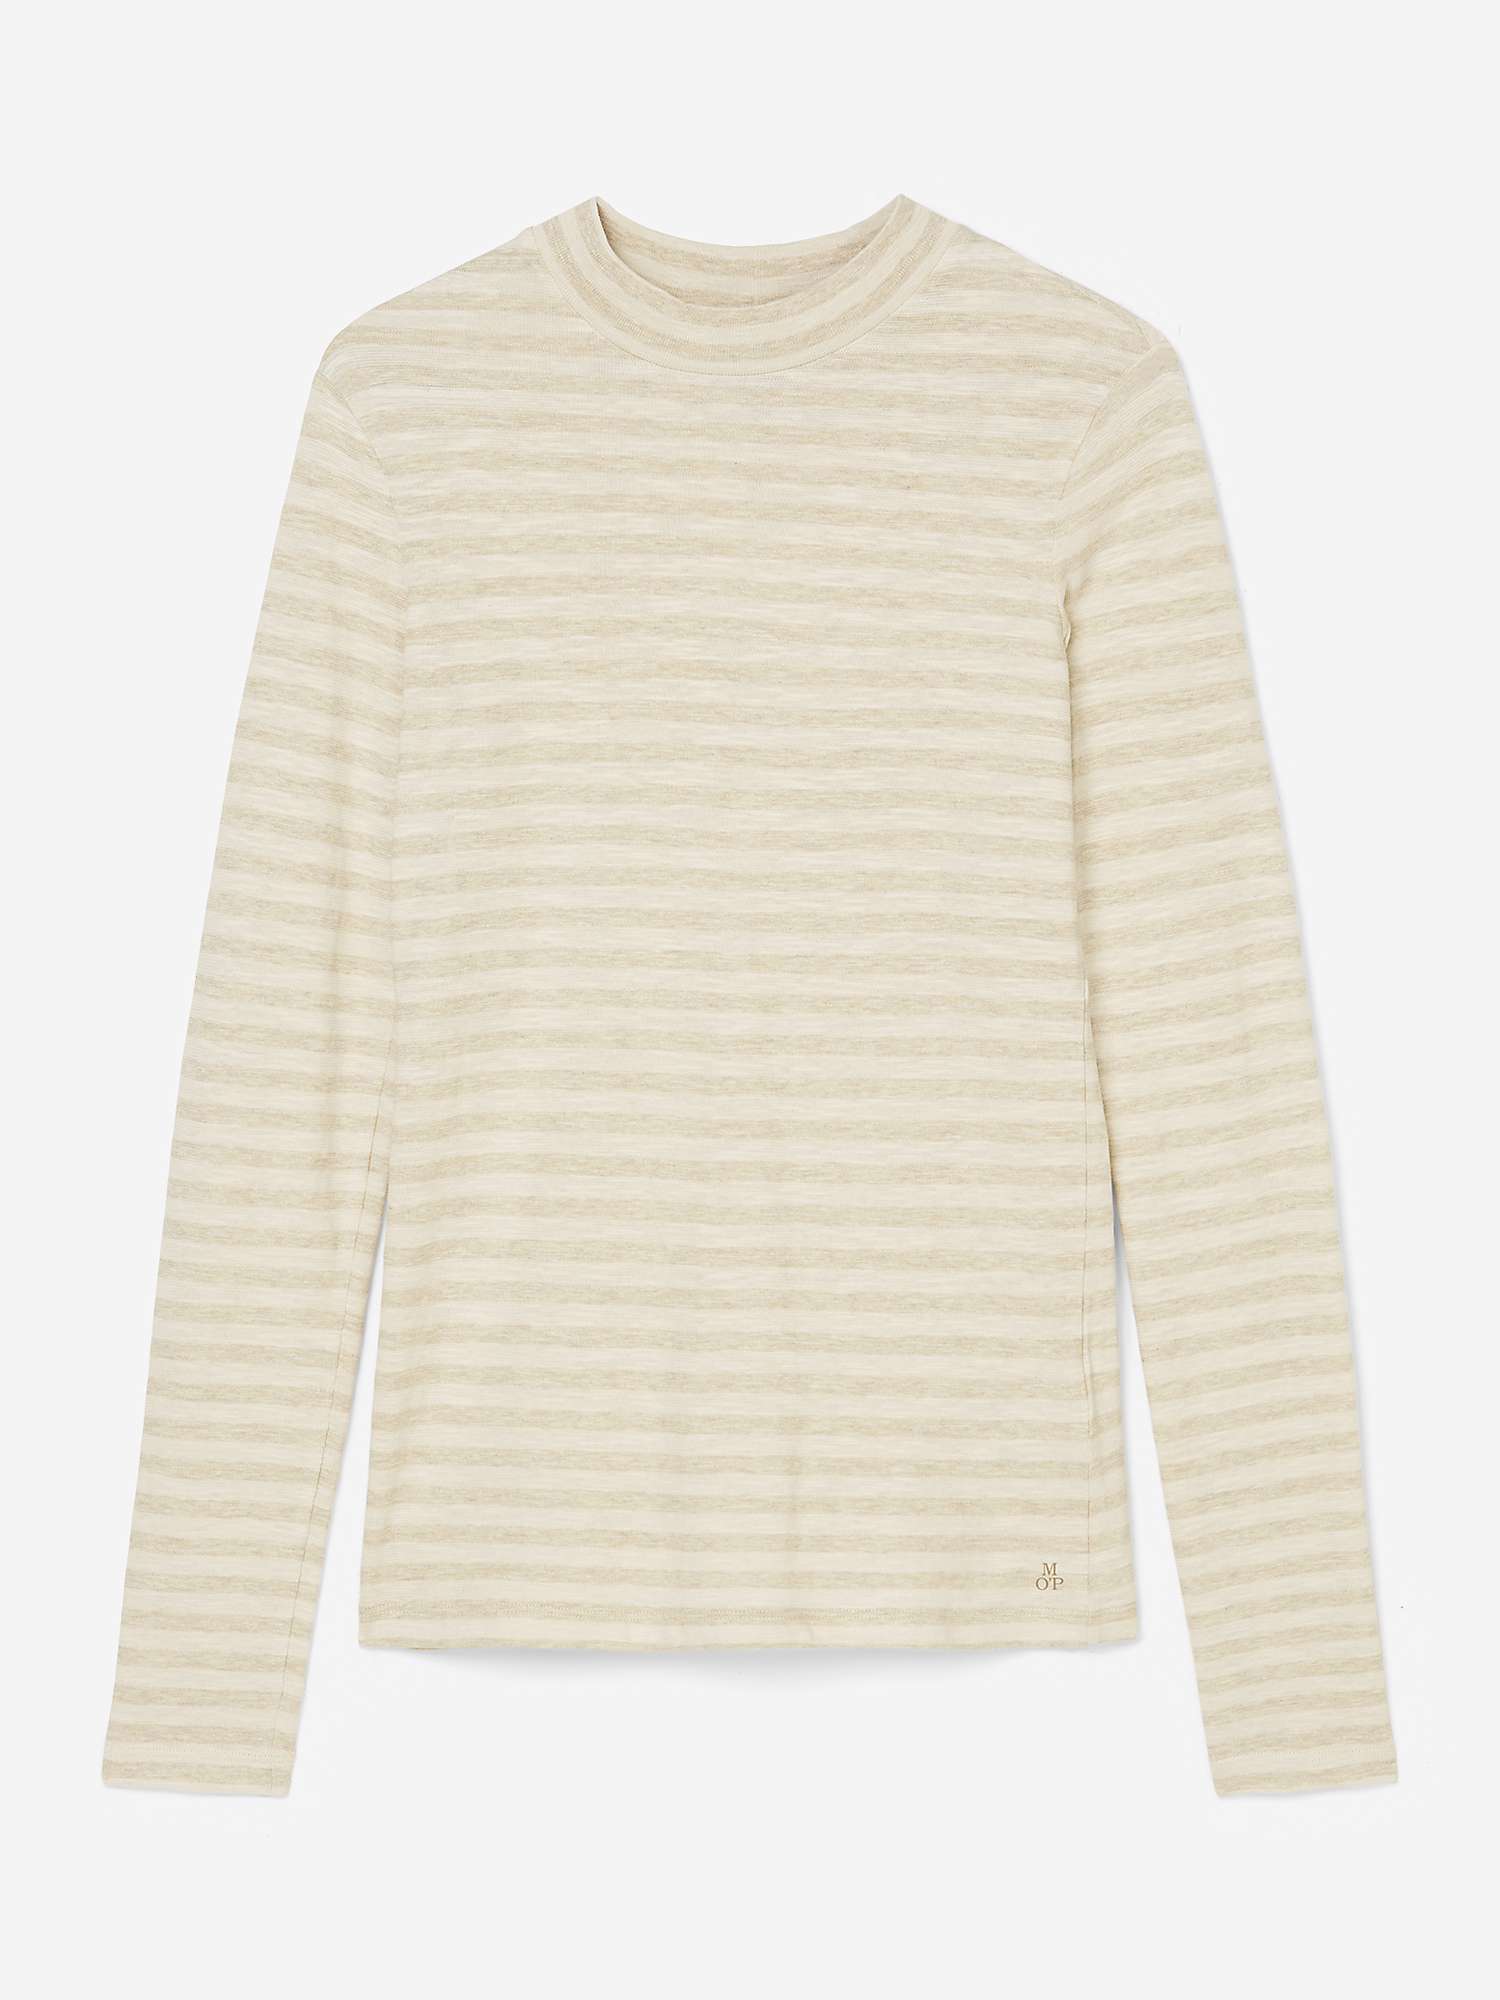 Buy Marc O'Polo Striped Long Sleeve Cotton T-Shirt Online at johnlewis.com